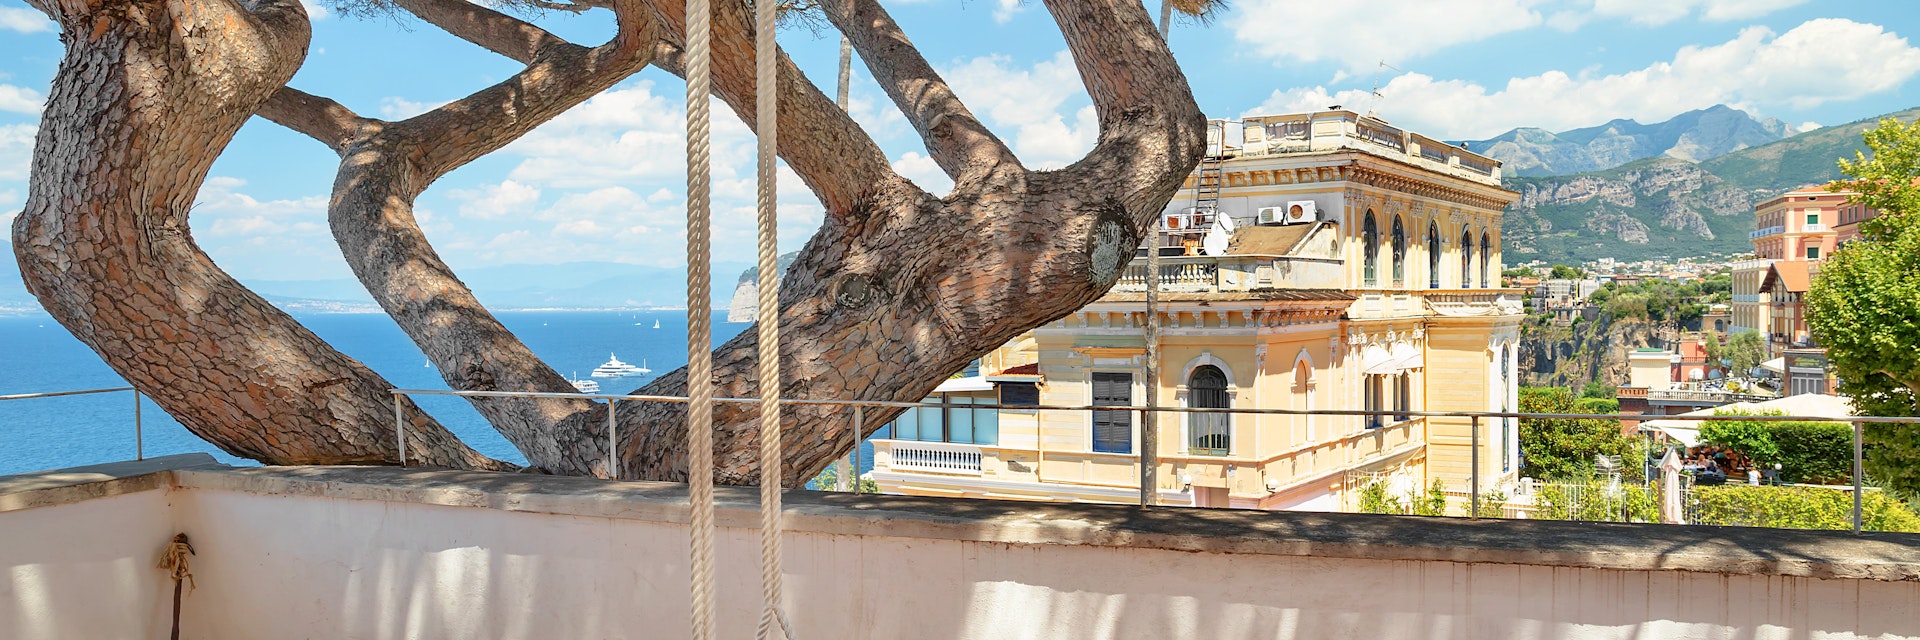 Raffaele Celantano was born in Sorrento.  Over the years he has documented daily life of Sorrento locals and black and white prints 'The Italian Collection' are displayed on the second floor of the Chiostro di San Francesco.  The swing used in the photograph taken by local artist Raffaele Celantano.